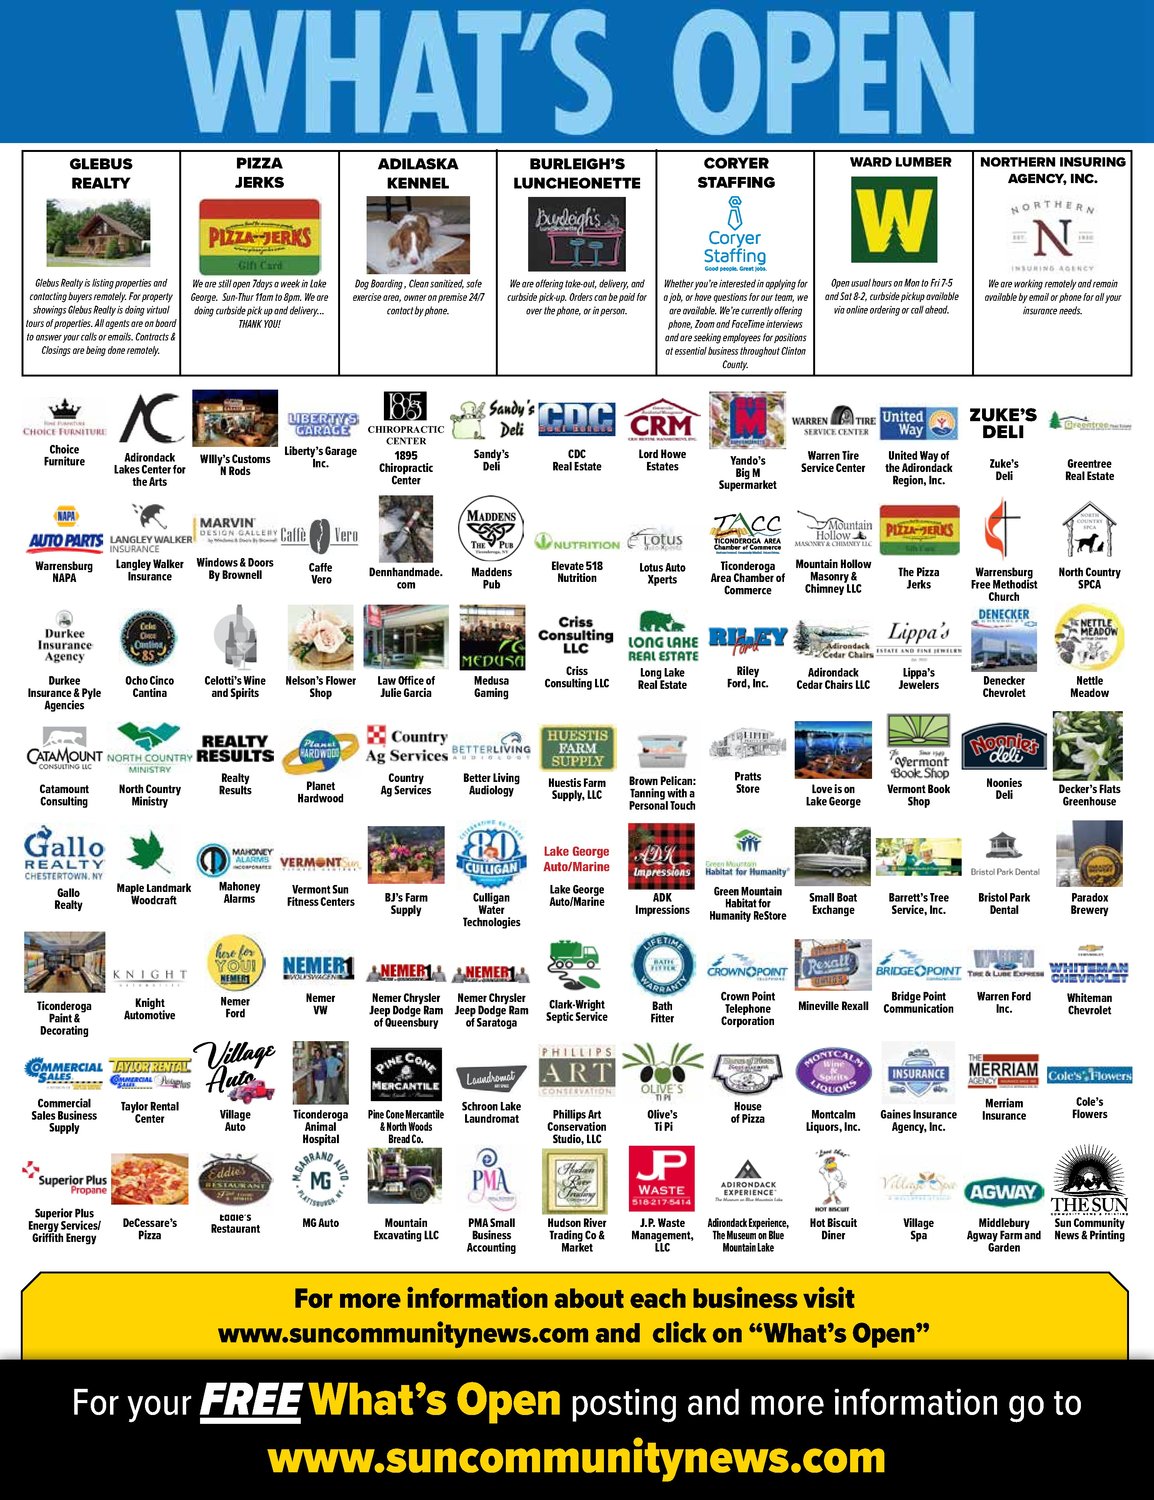 Sun Community Newspapers in Elizabethtown, N.Y., ran the logo of every company that posted to What's Open to promote the app to both readers and businesses.